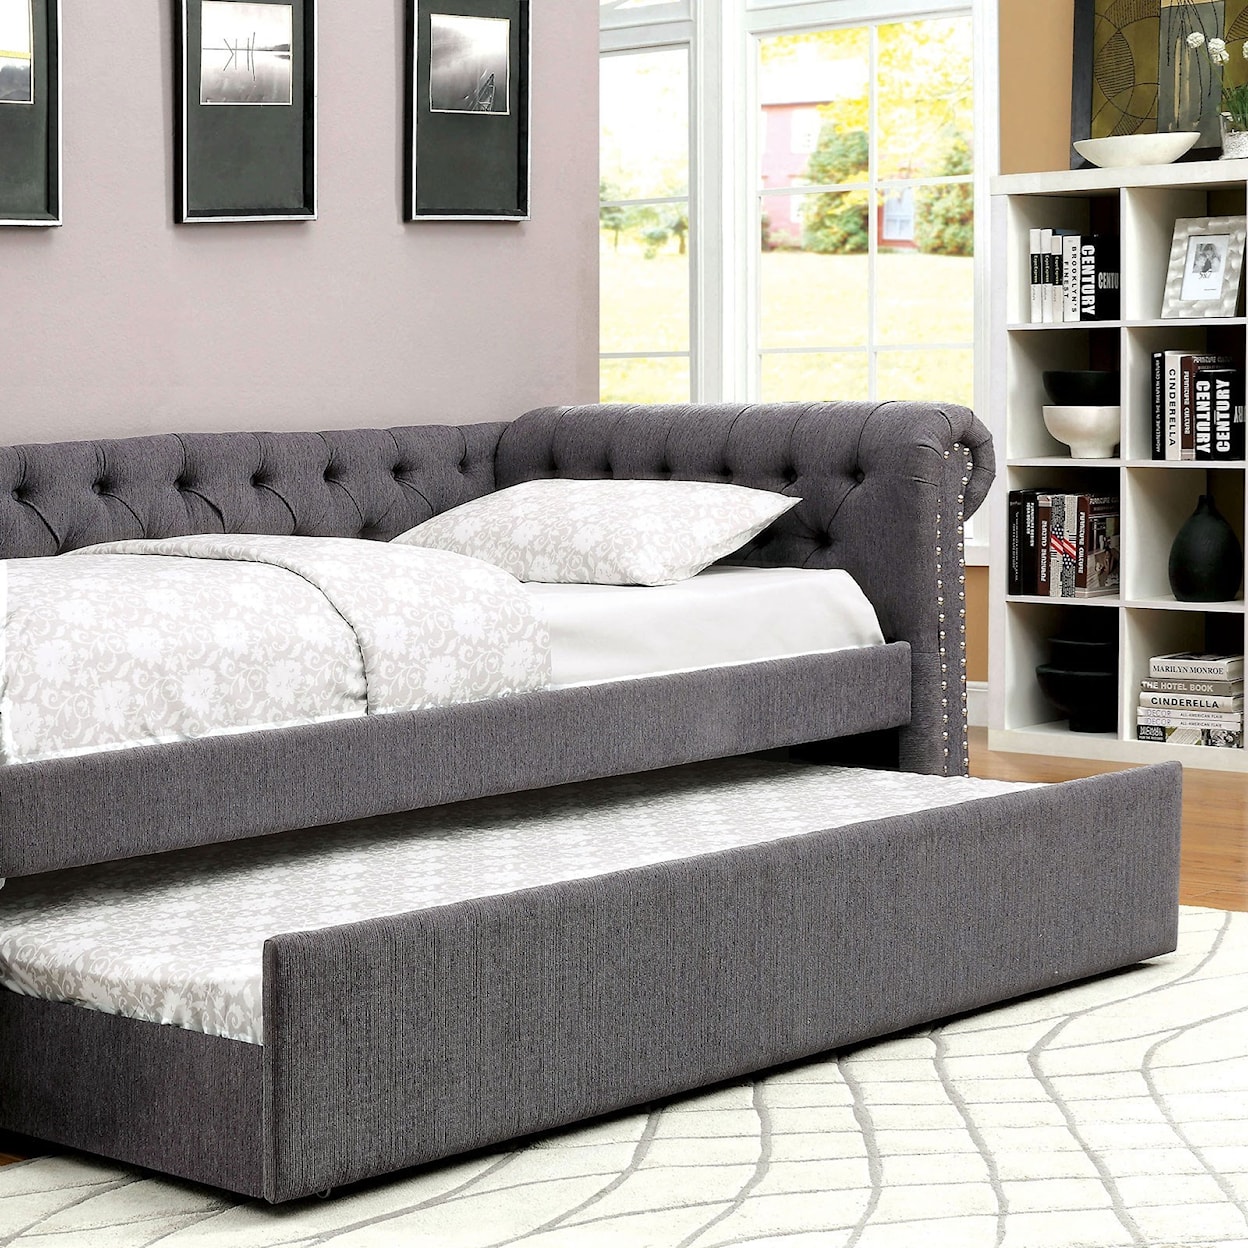 Furniture of America - FOA Leanna Daybed w/ Trundle